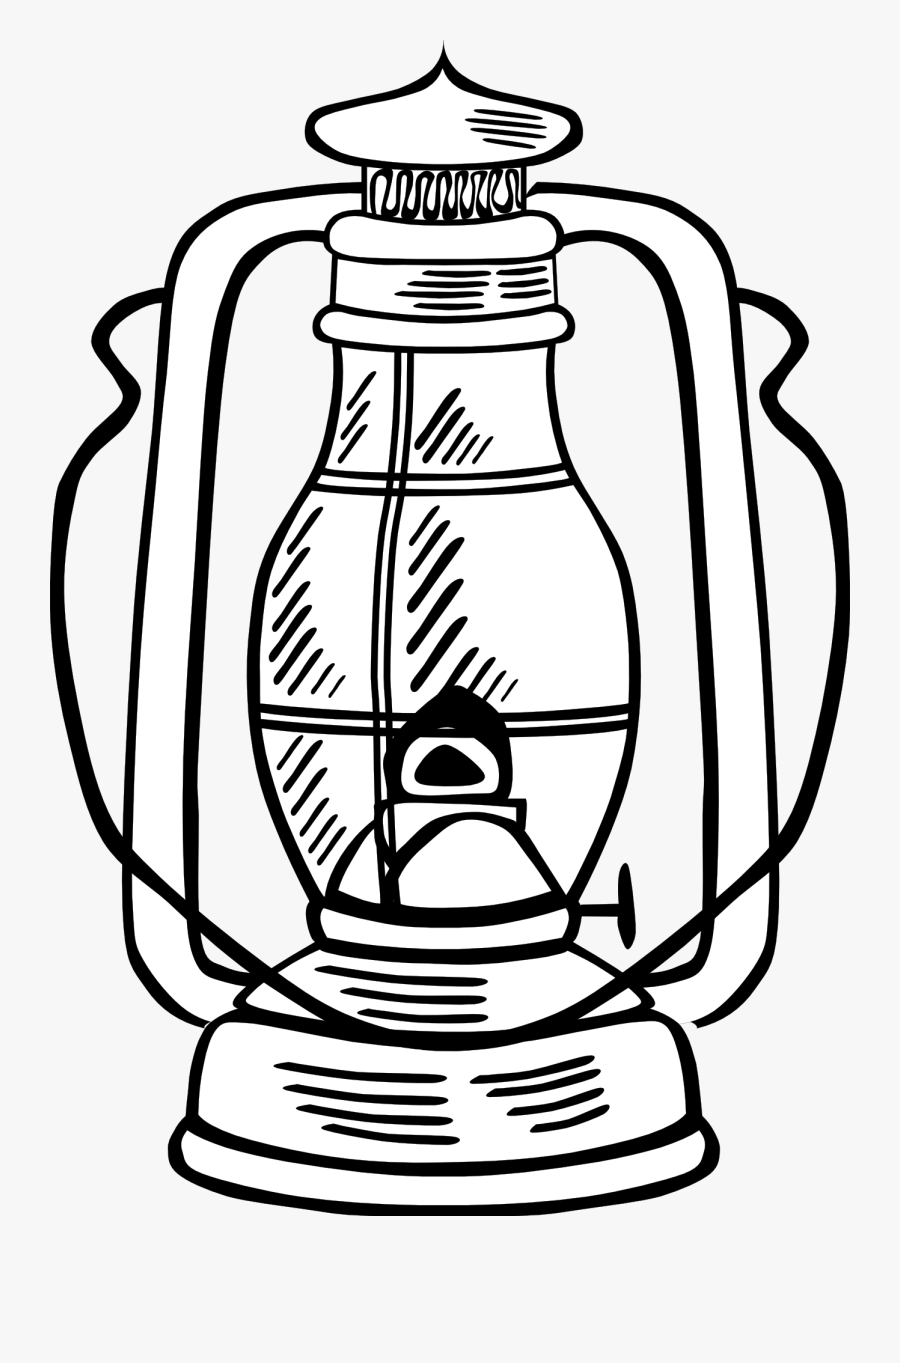 Lamp - Clipart - Black - And - White - Lamp Clipart Black And White, Transparent Clipart